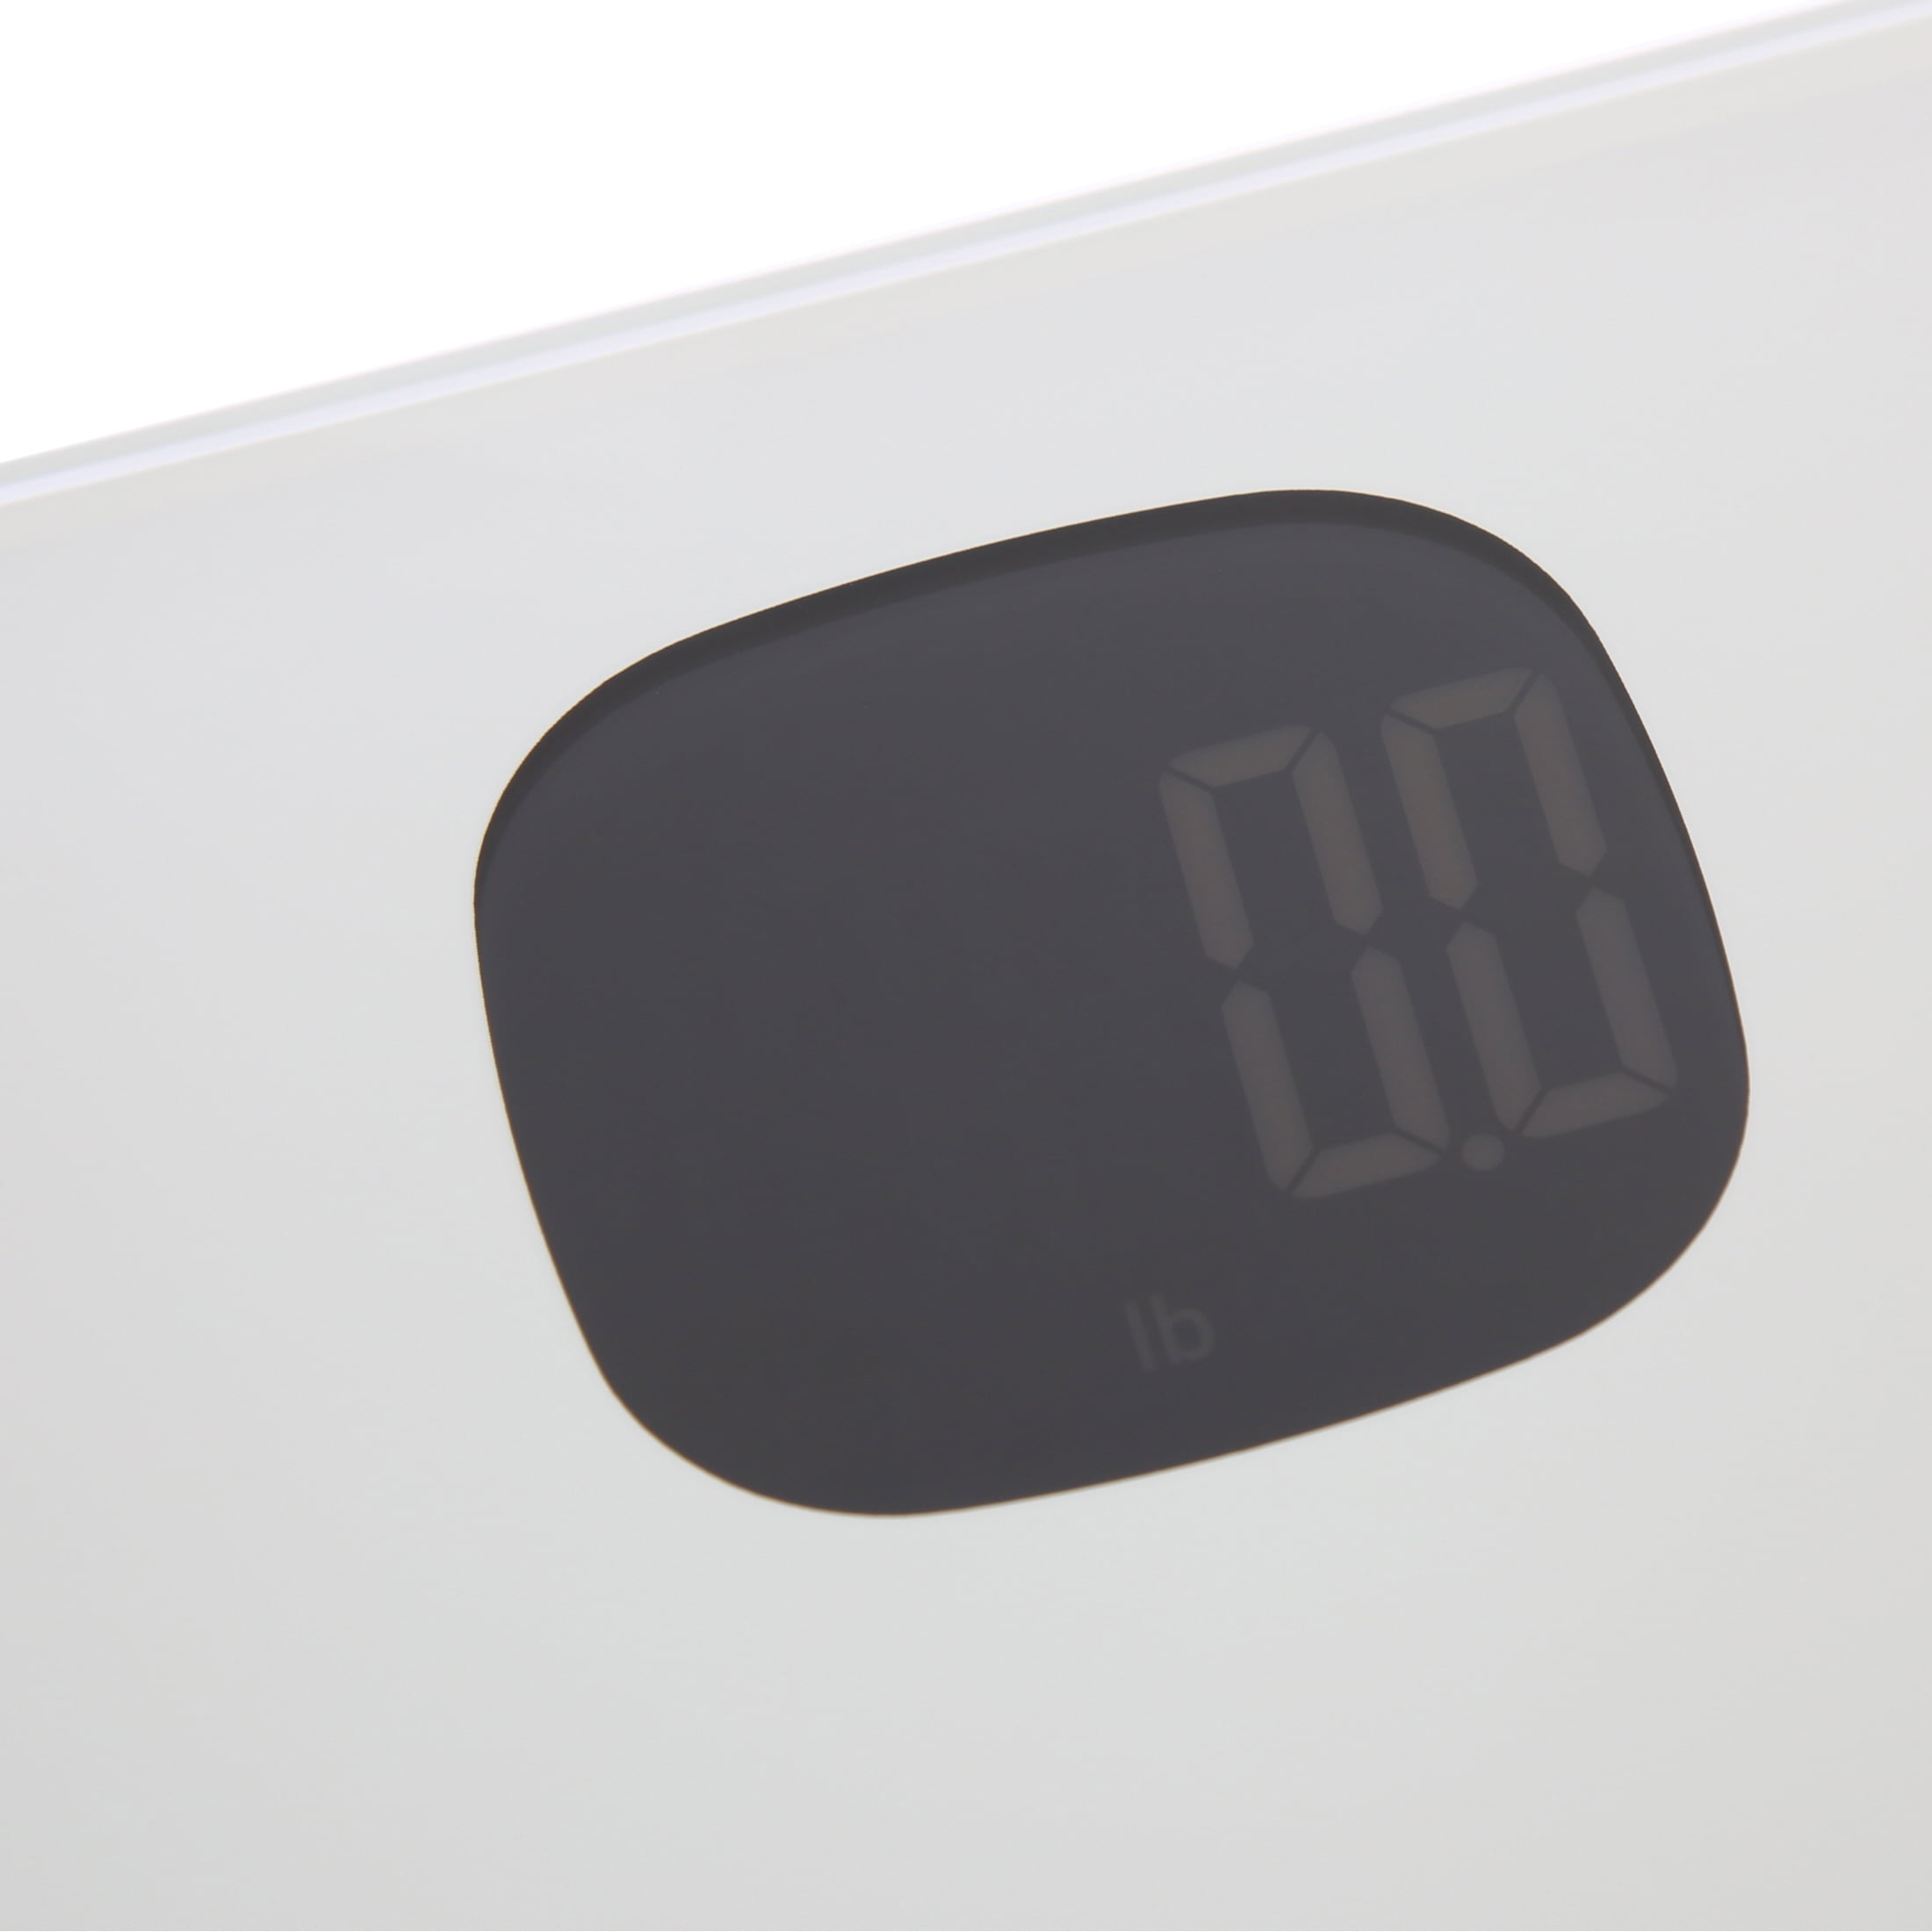 Fitbit Aria Air Smart Scale $39.95 (Reg. $49.95) + FREE Shipping - FAB  Ratings! 3,000+ 4.5/5 Stars! - Fabulessly Frugal